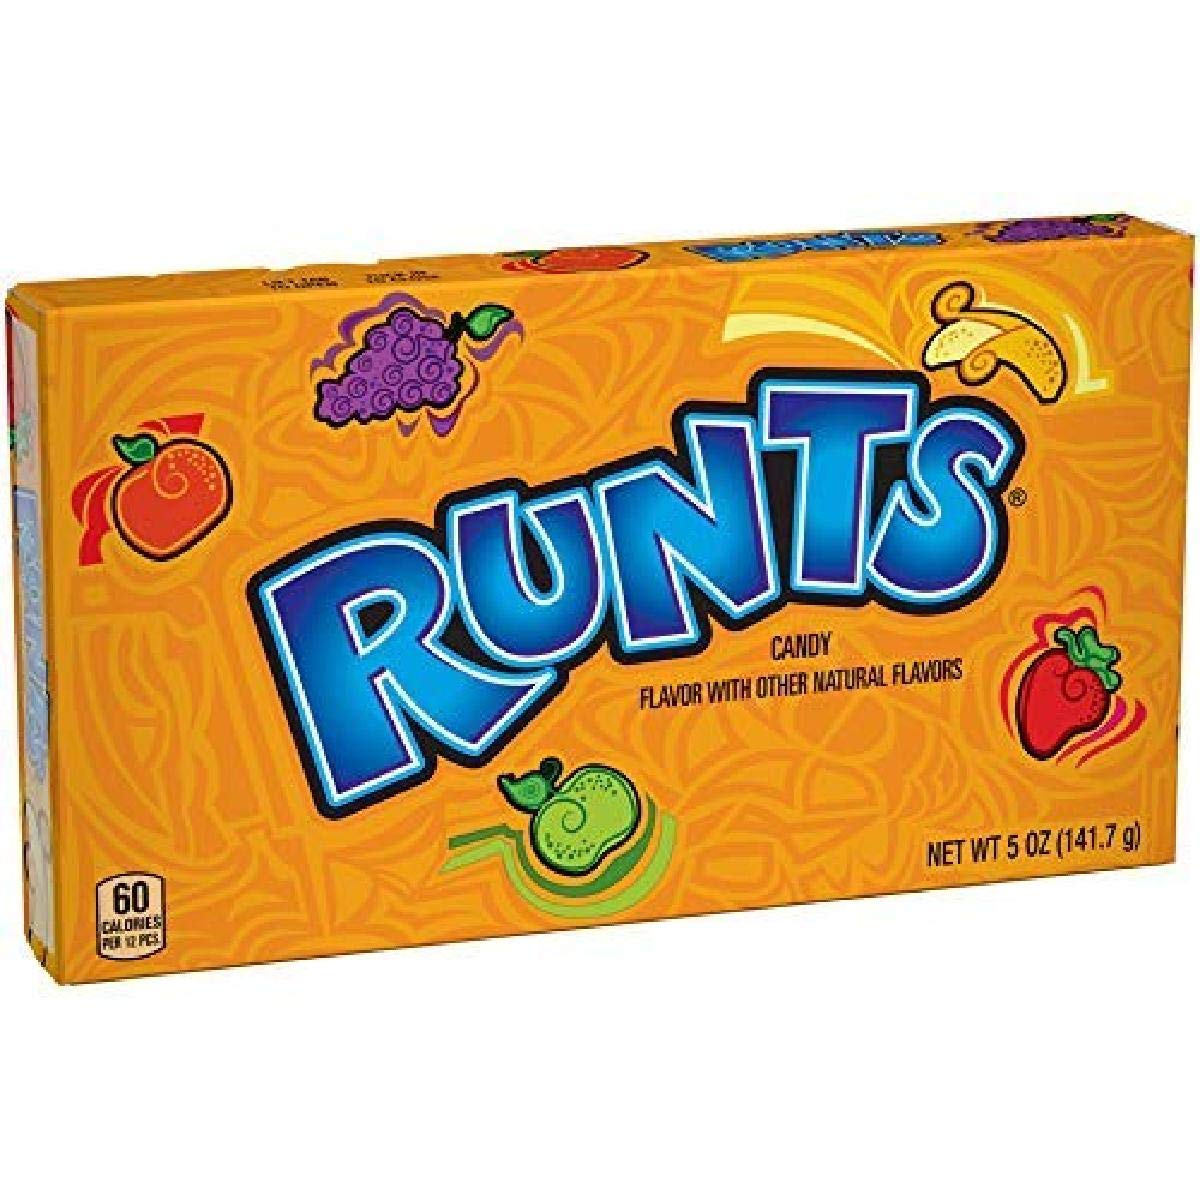 Where To Buy Runts Candy Canada